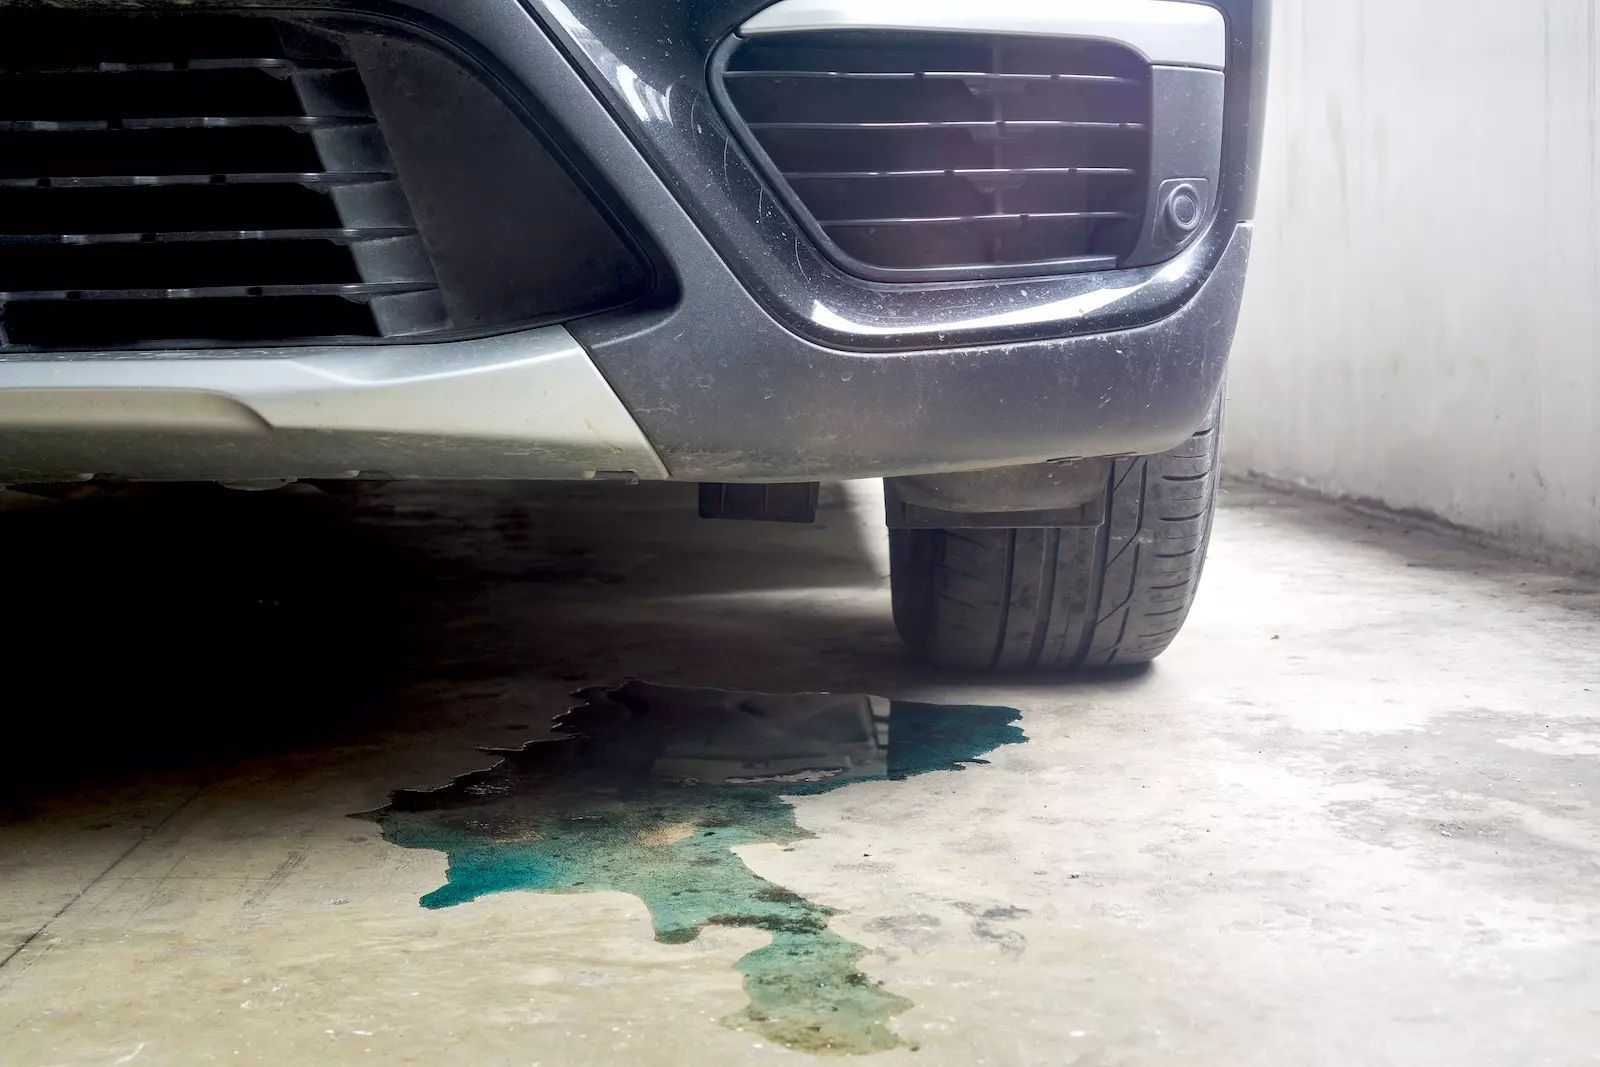 10 most expensive car repairs you didn't see coming